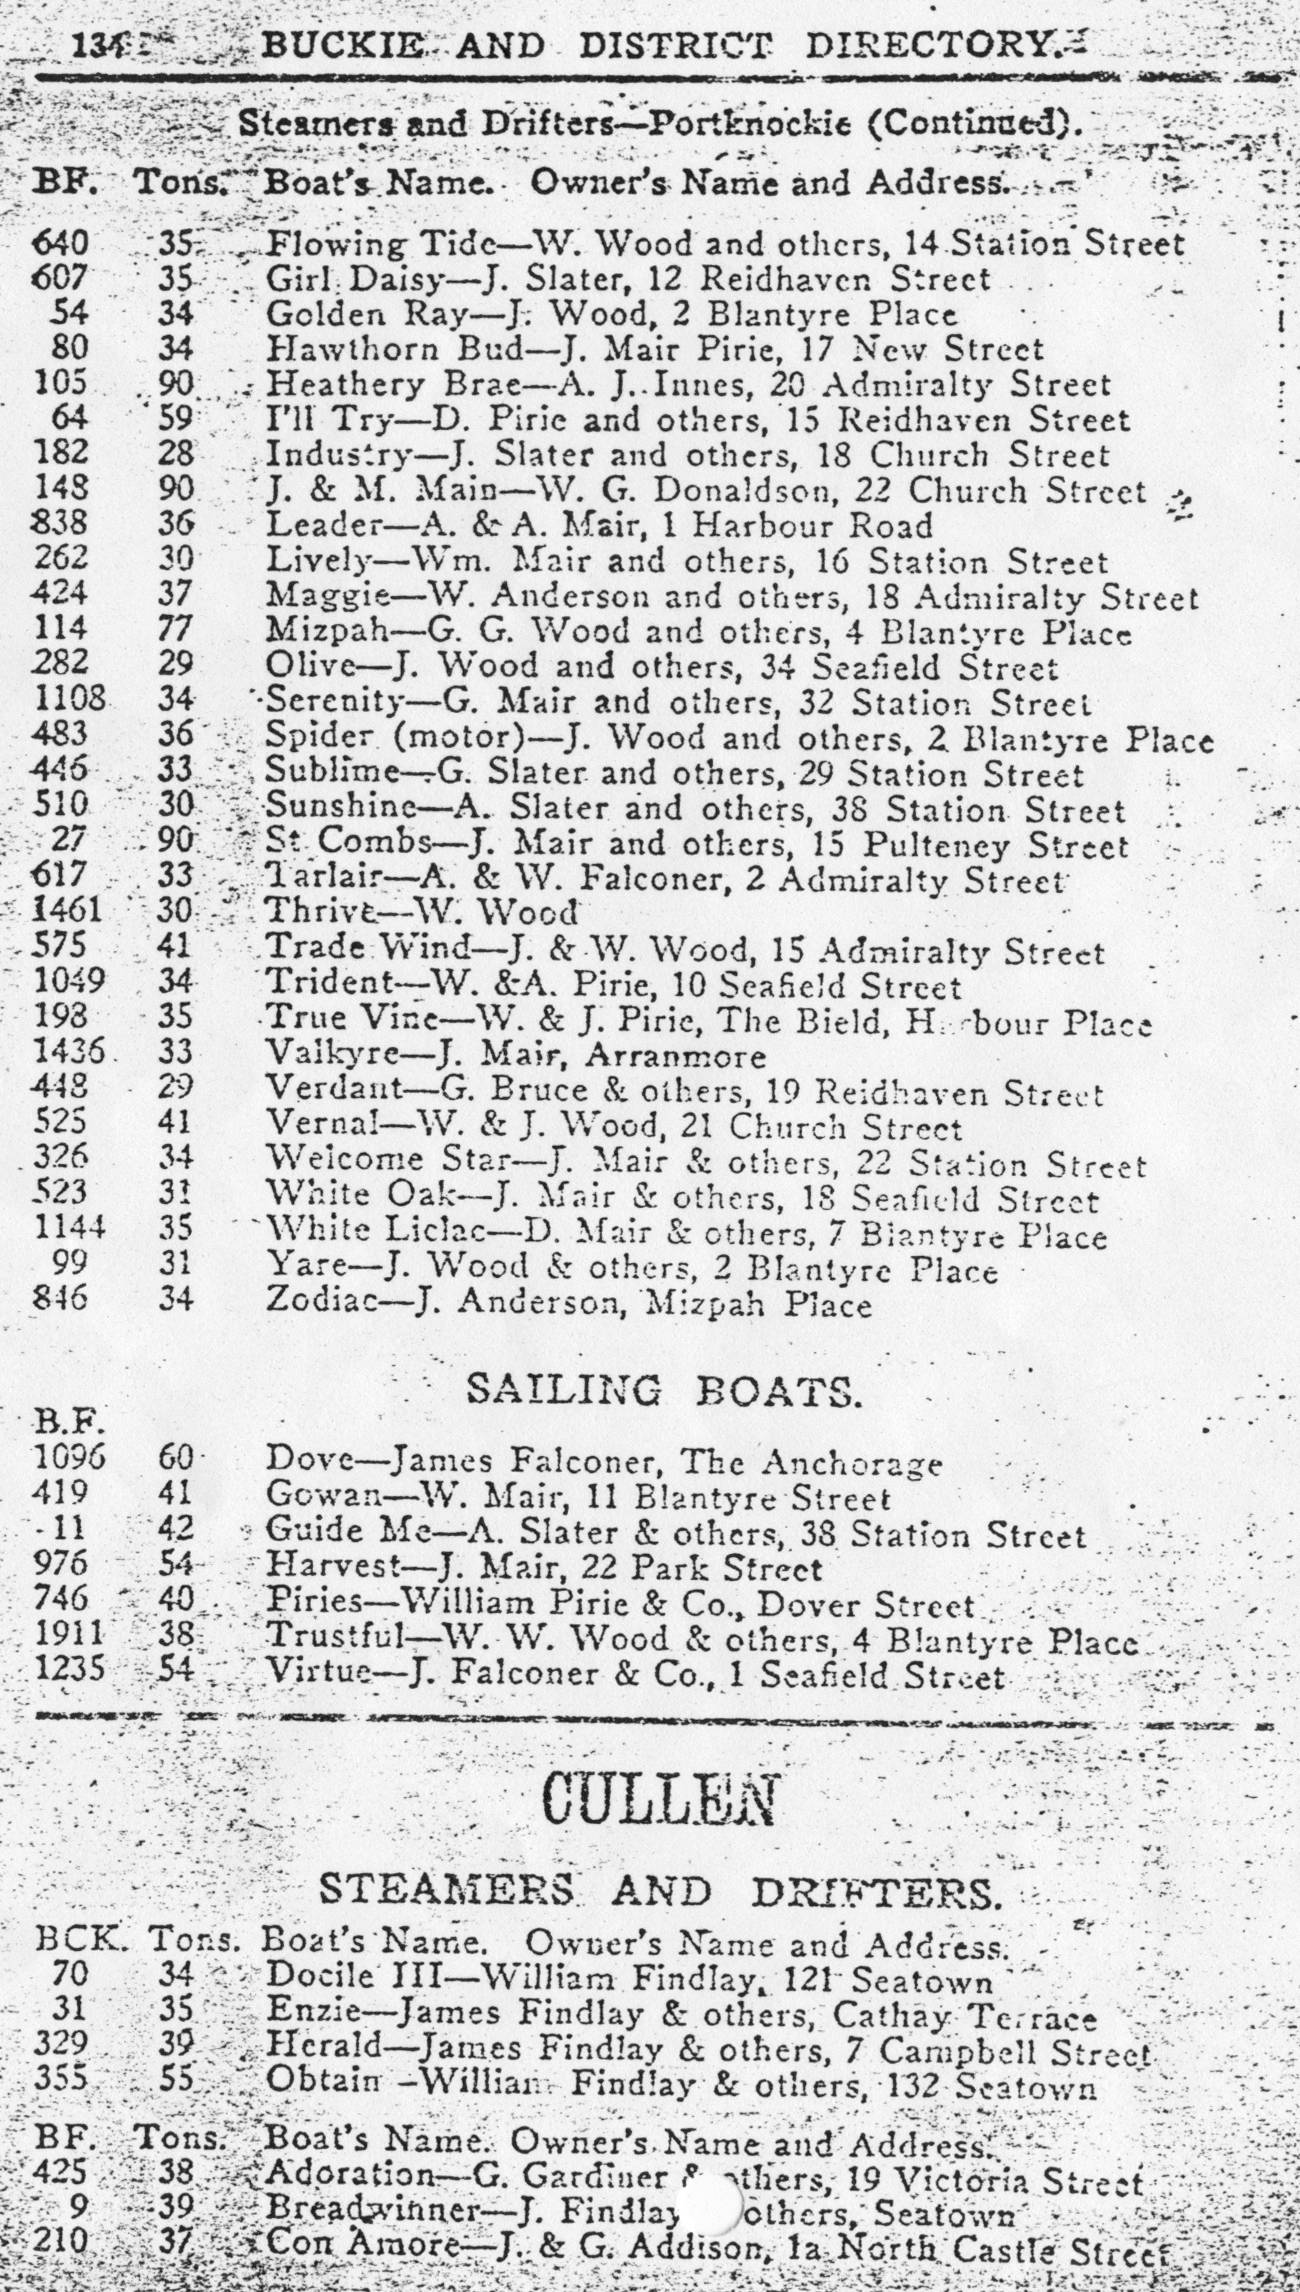 Buckie and District Directory 1926, page 134, Steamers and Drifters